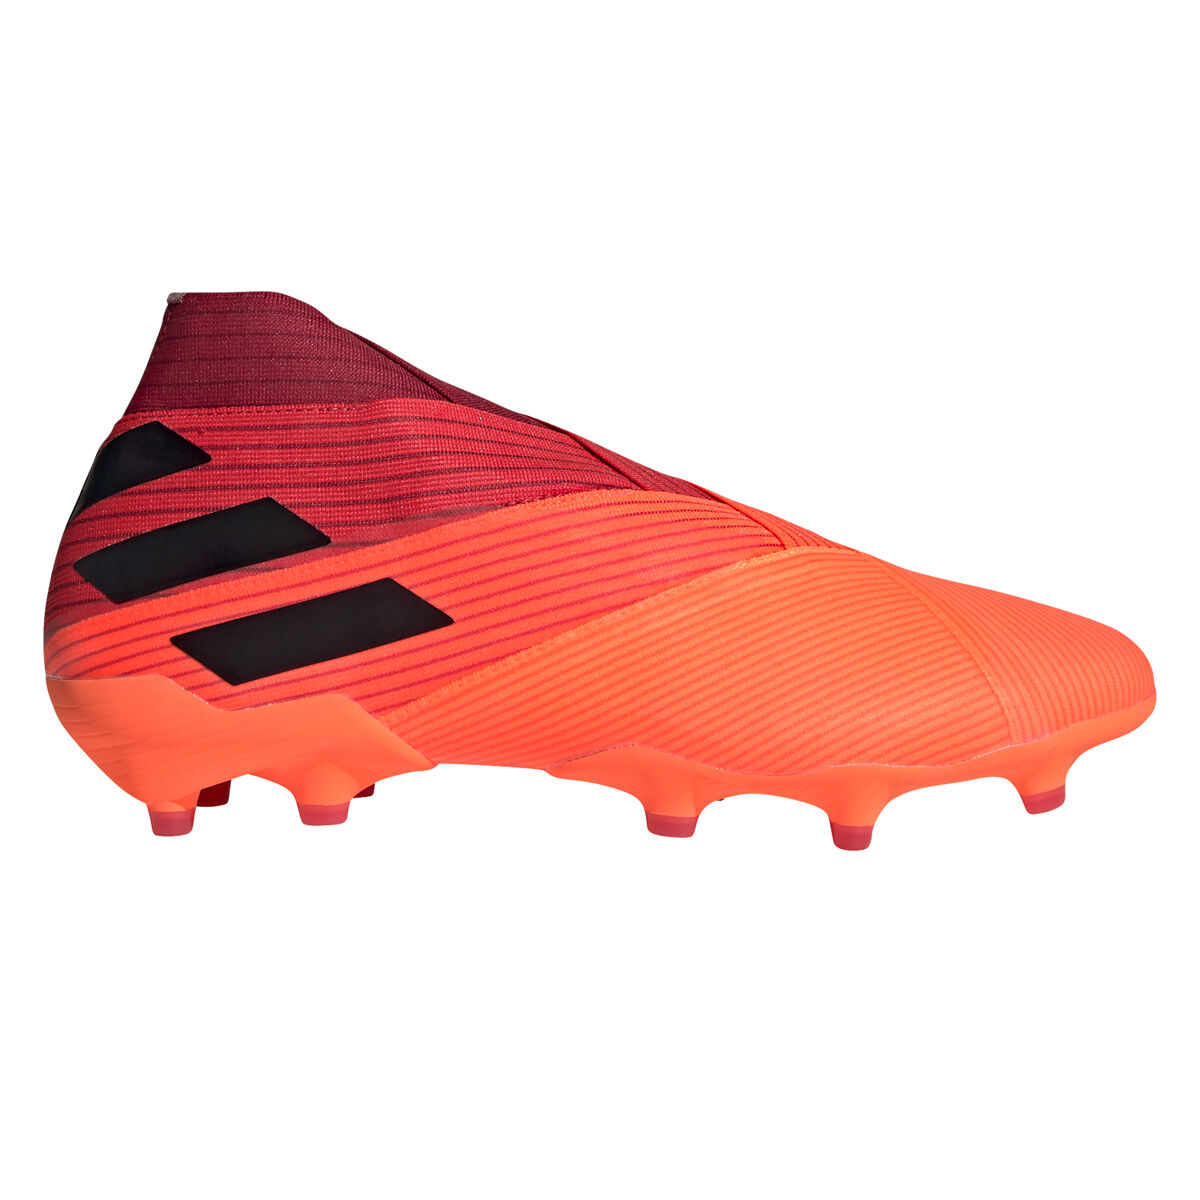 adidas rugby boots australia